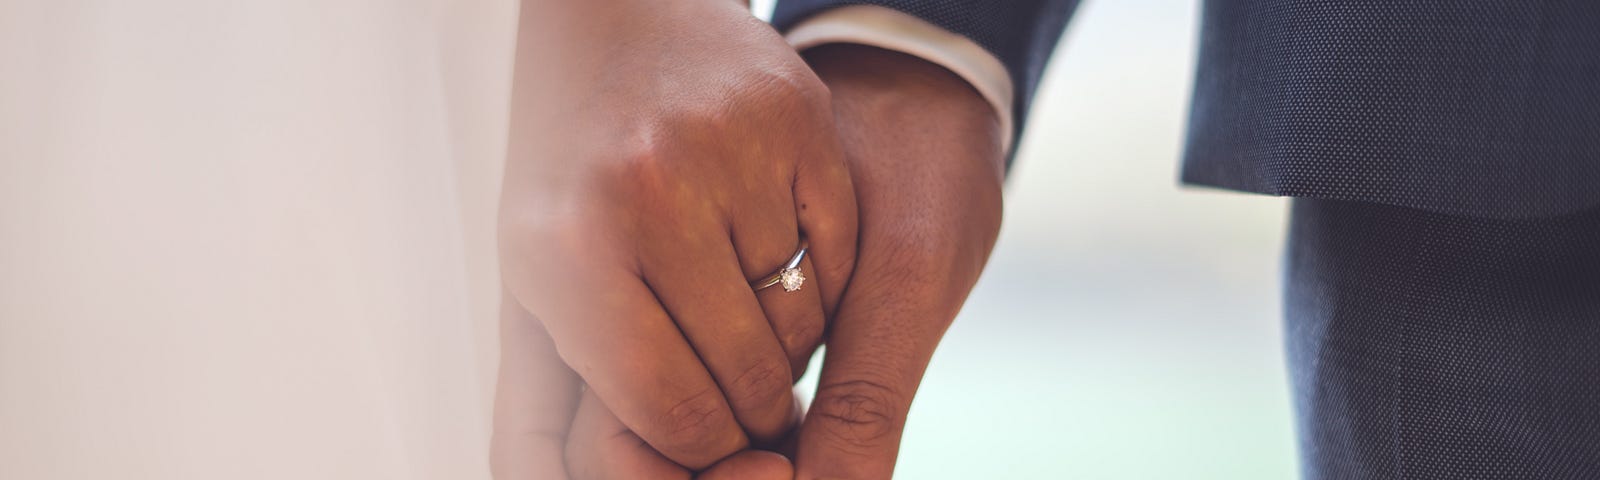 A close-up of a couple’s hands together, the woman in a white dress and the man in a suit.